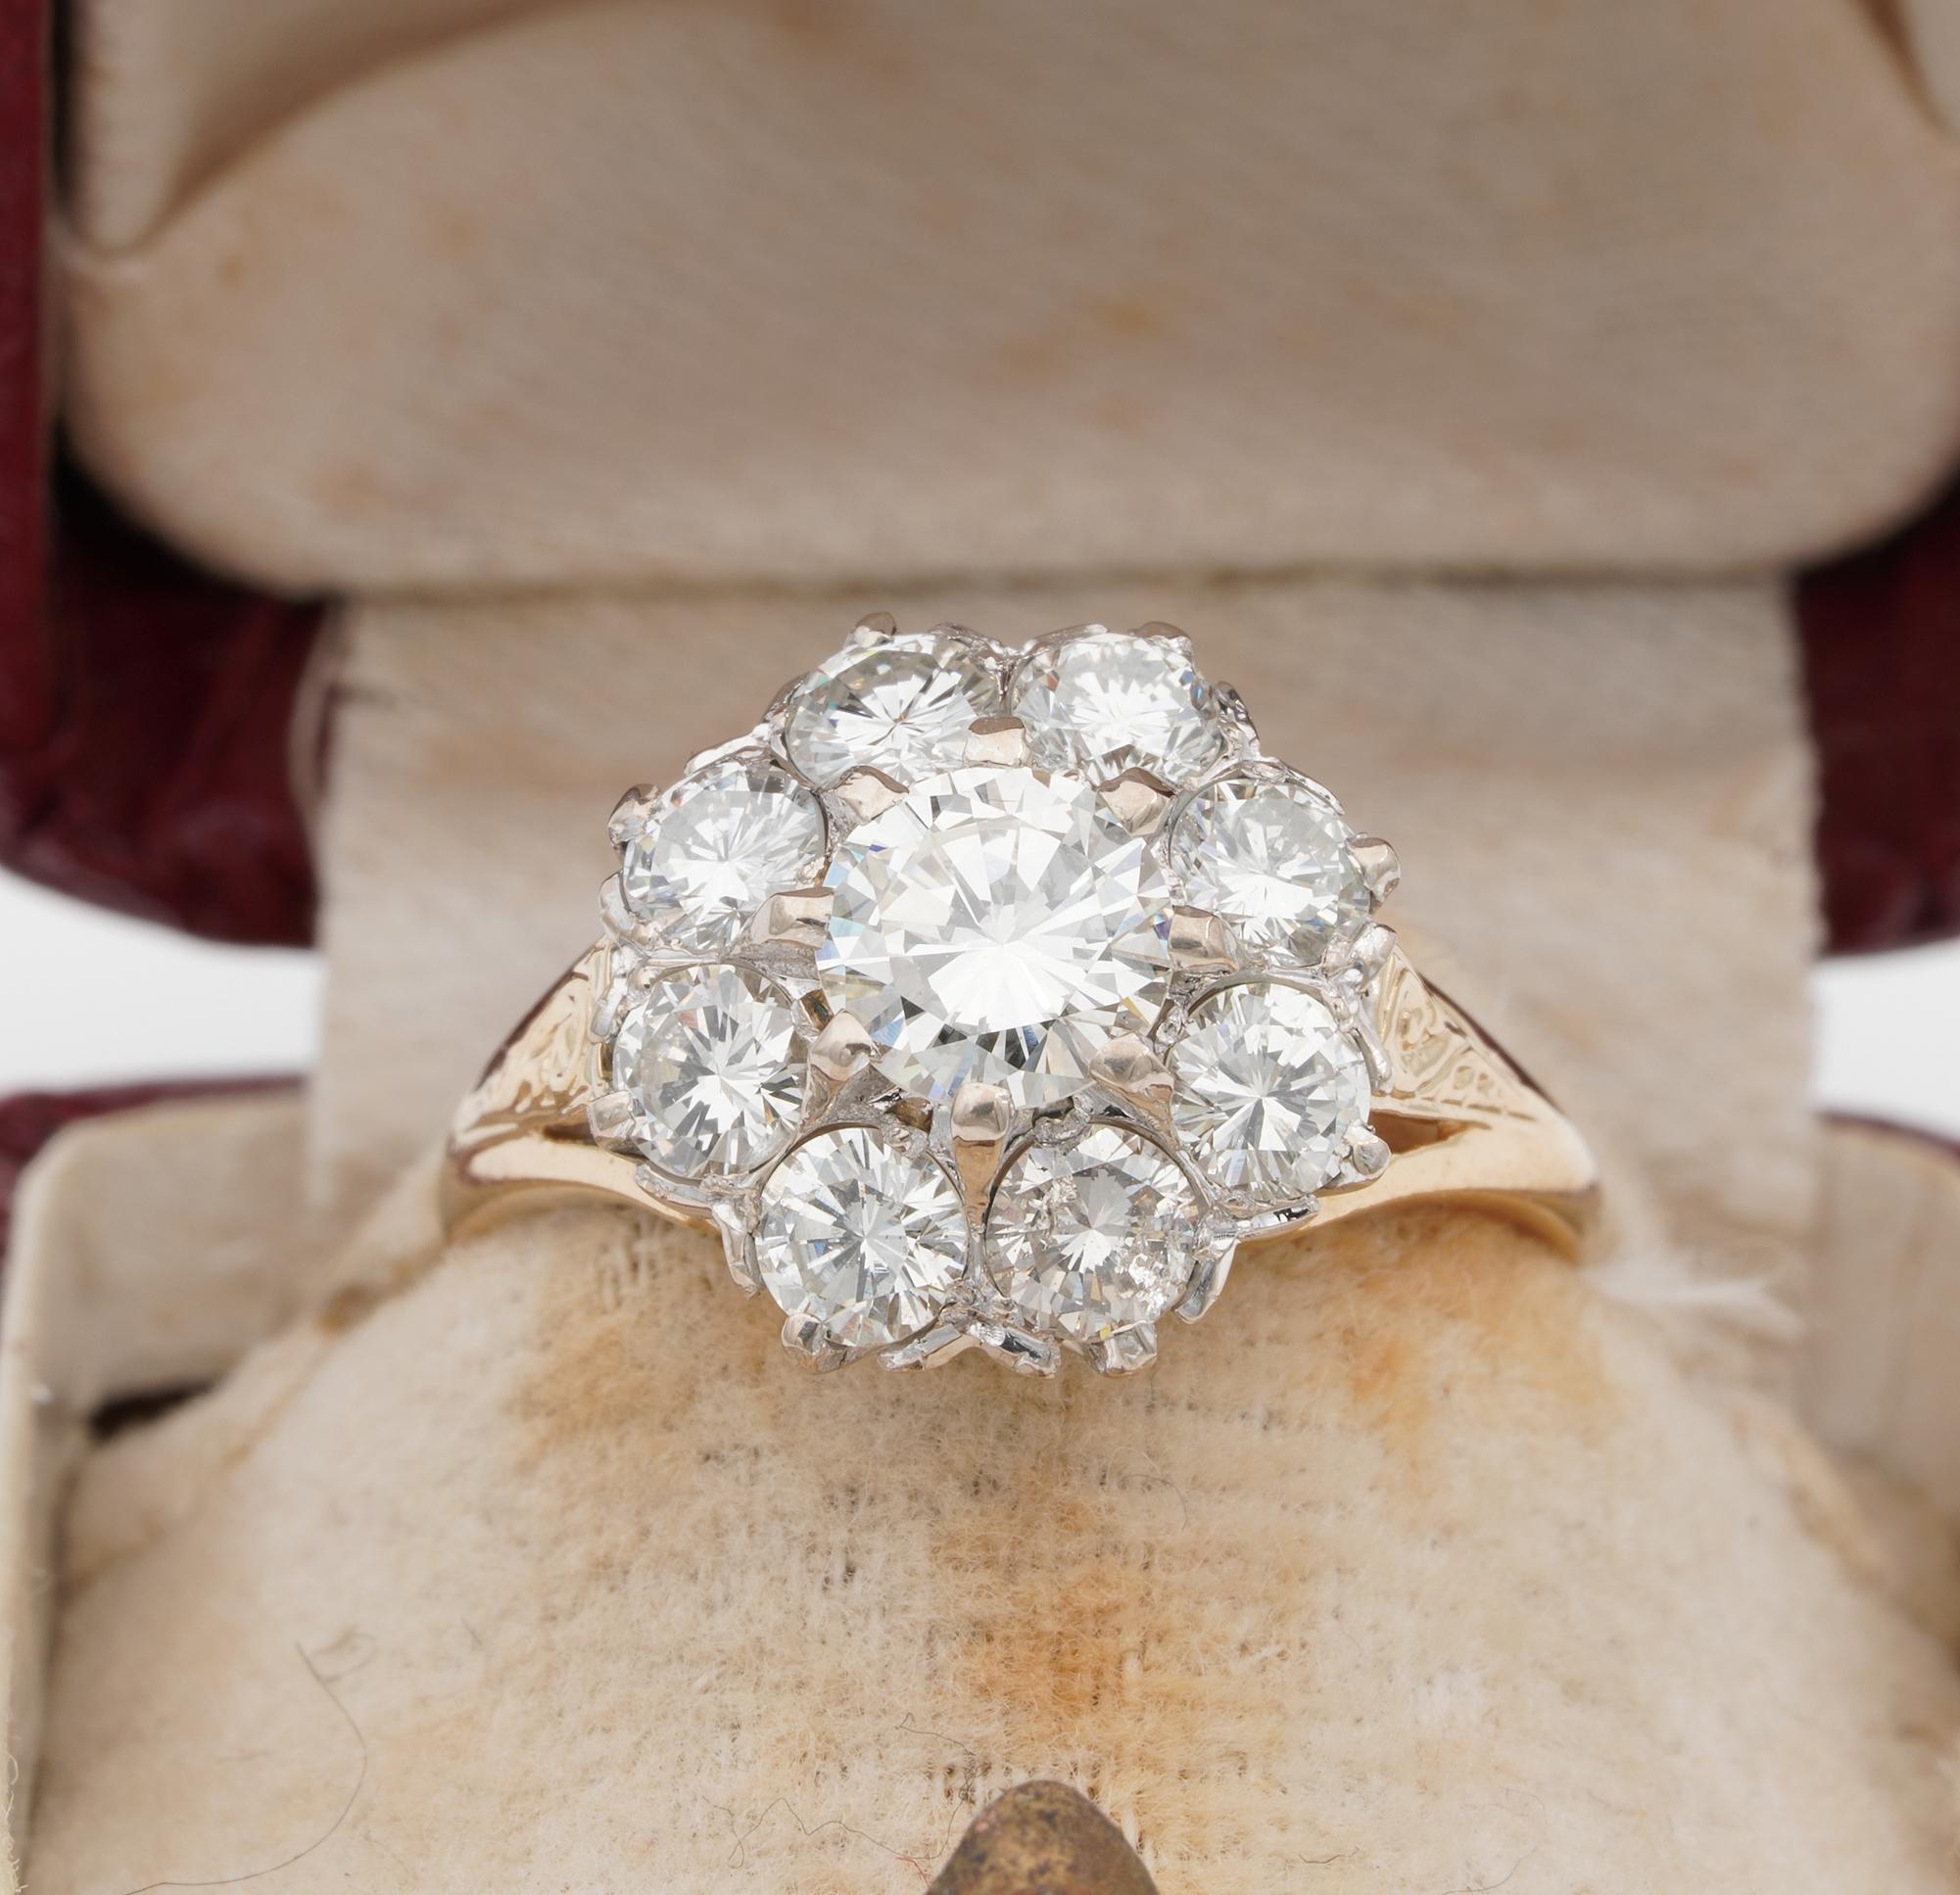 This imposing classy vintage ring dates 1940 ca, suitable for engagement or for life companion
The classy style of diamond cluster in the romantic shape of a daisy, always loved and statement ring for a lifetime
Hand crafted of solid 18 KT gold,